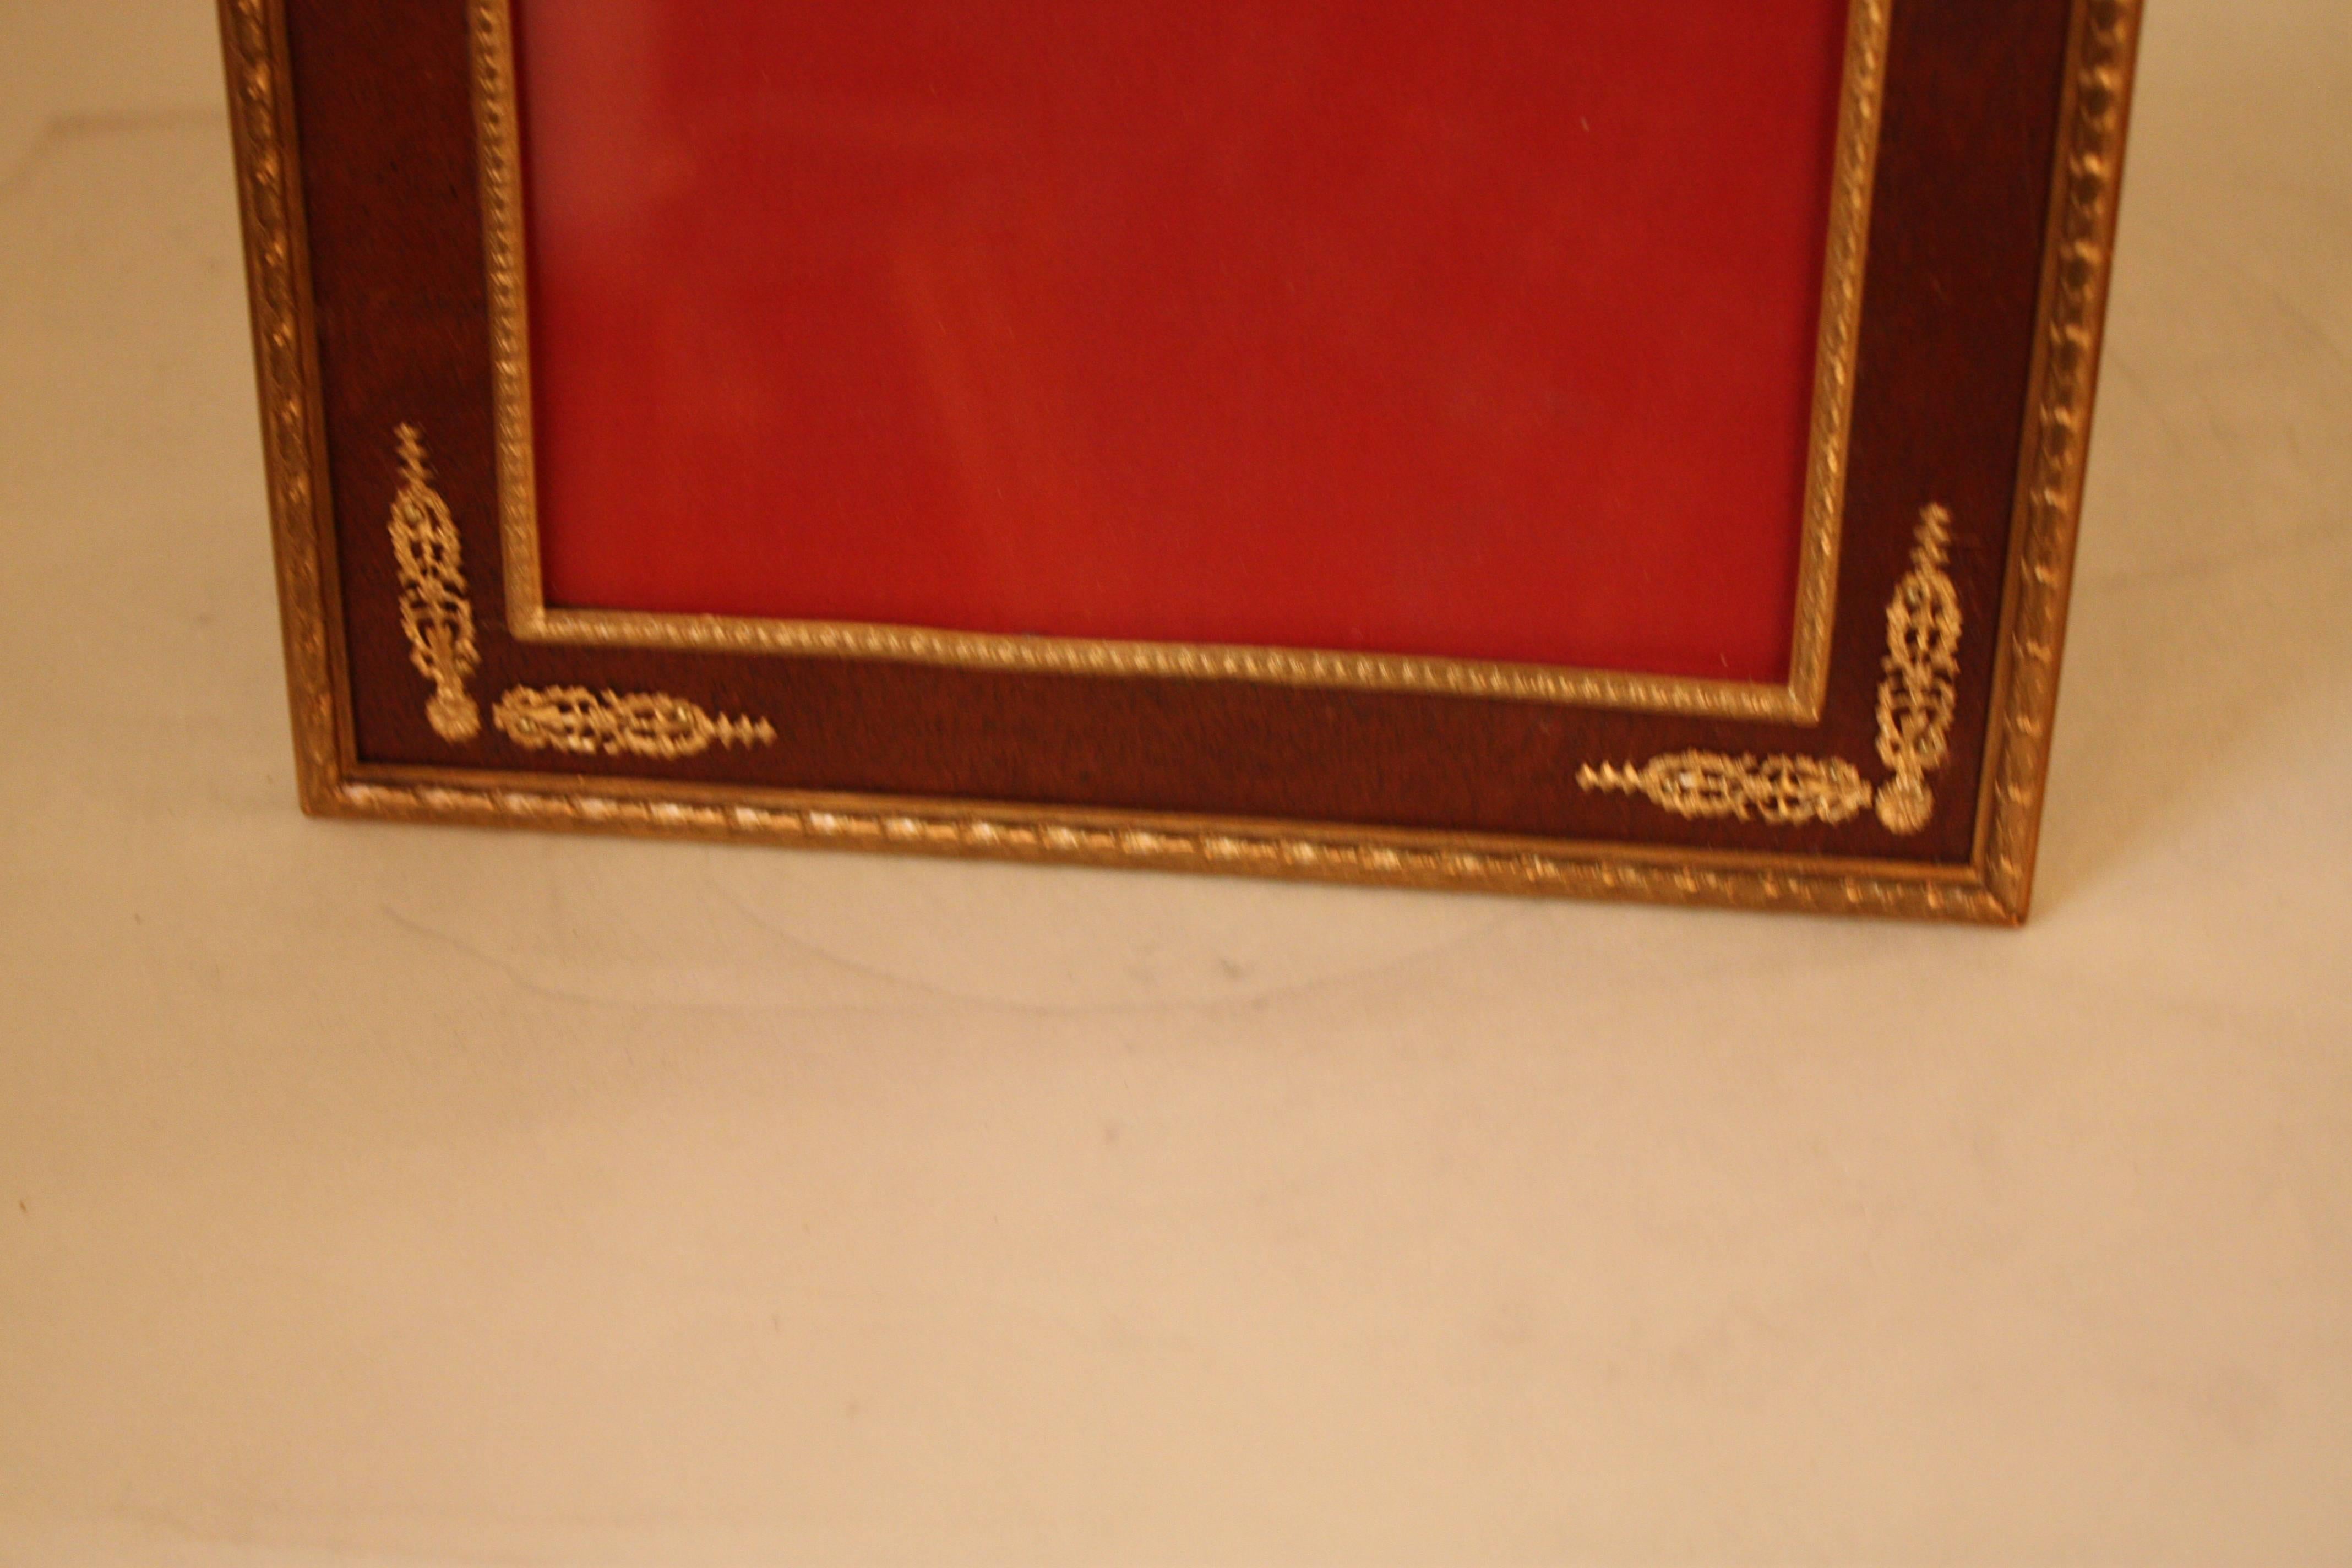 Elegant 19th century French Empire style bronze picture frame with wood trim and a variety of classical bronze-mounted decoration.
Picture size 6.5